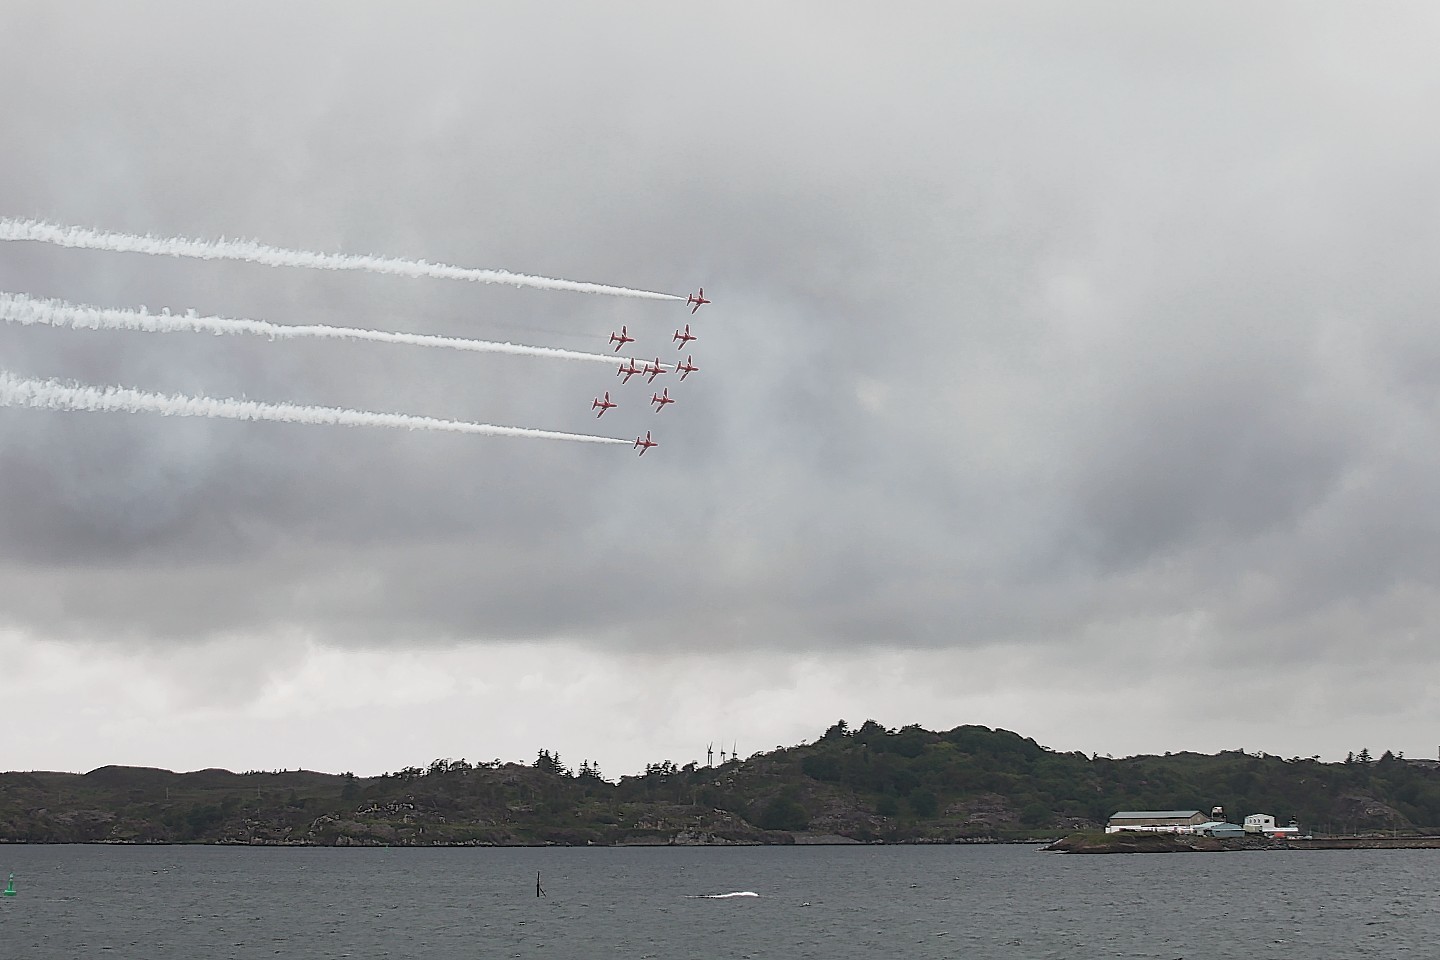 Red Arrows over Stornoway. Credit: Sandy MacIver